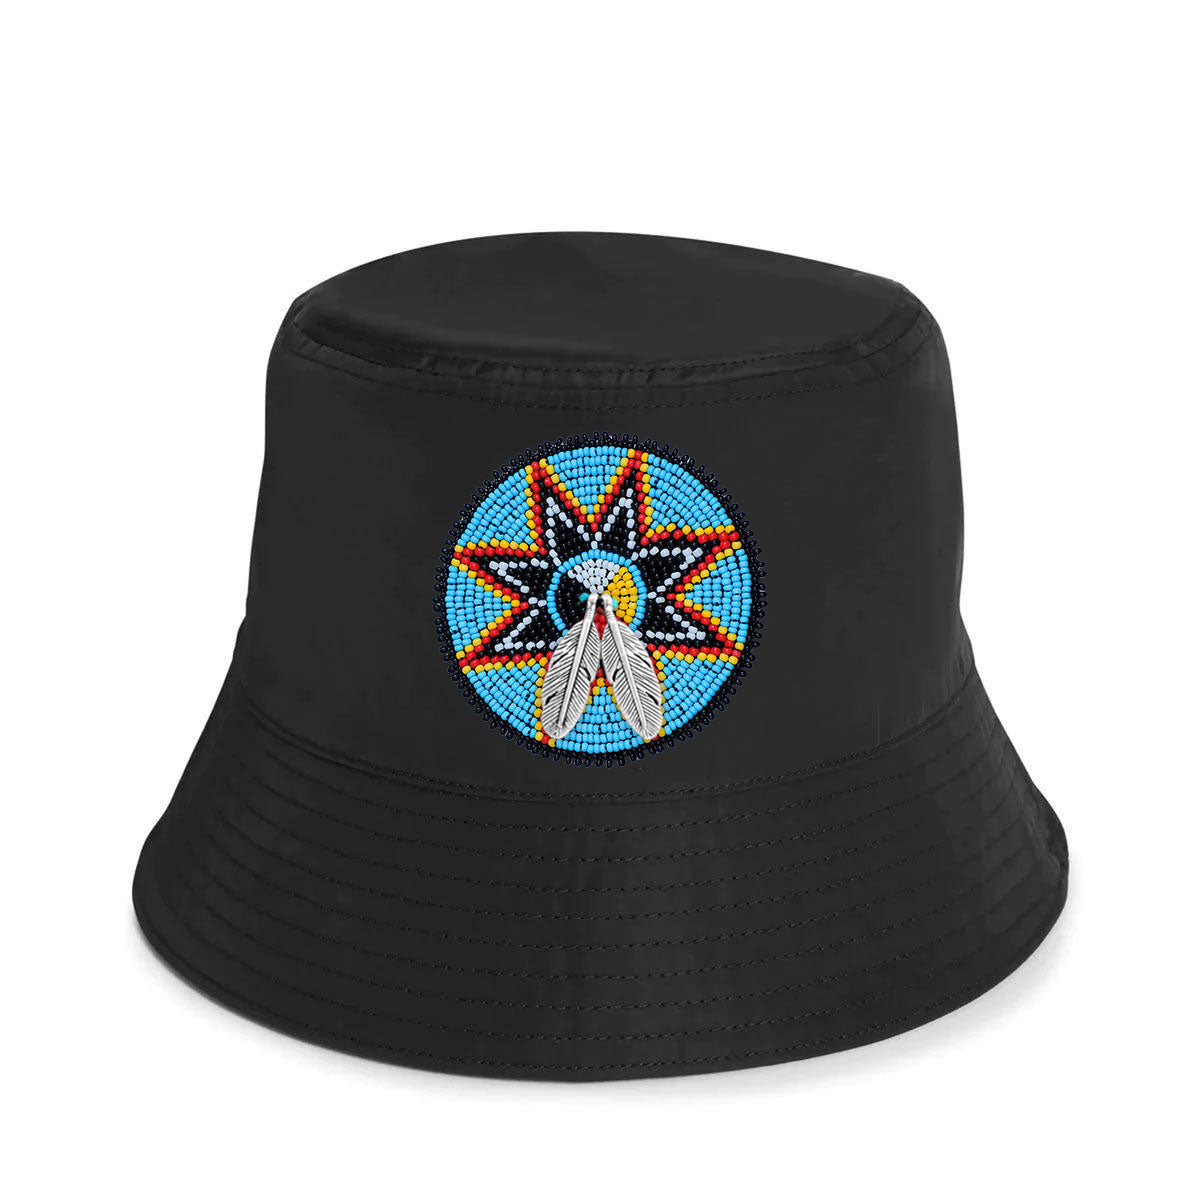 SALE 50% OFF - Medicine Beaded Unisex Cotton Hat with Native American